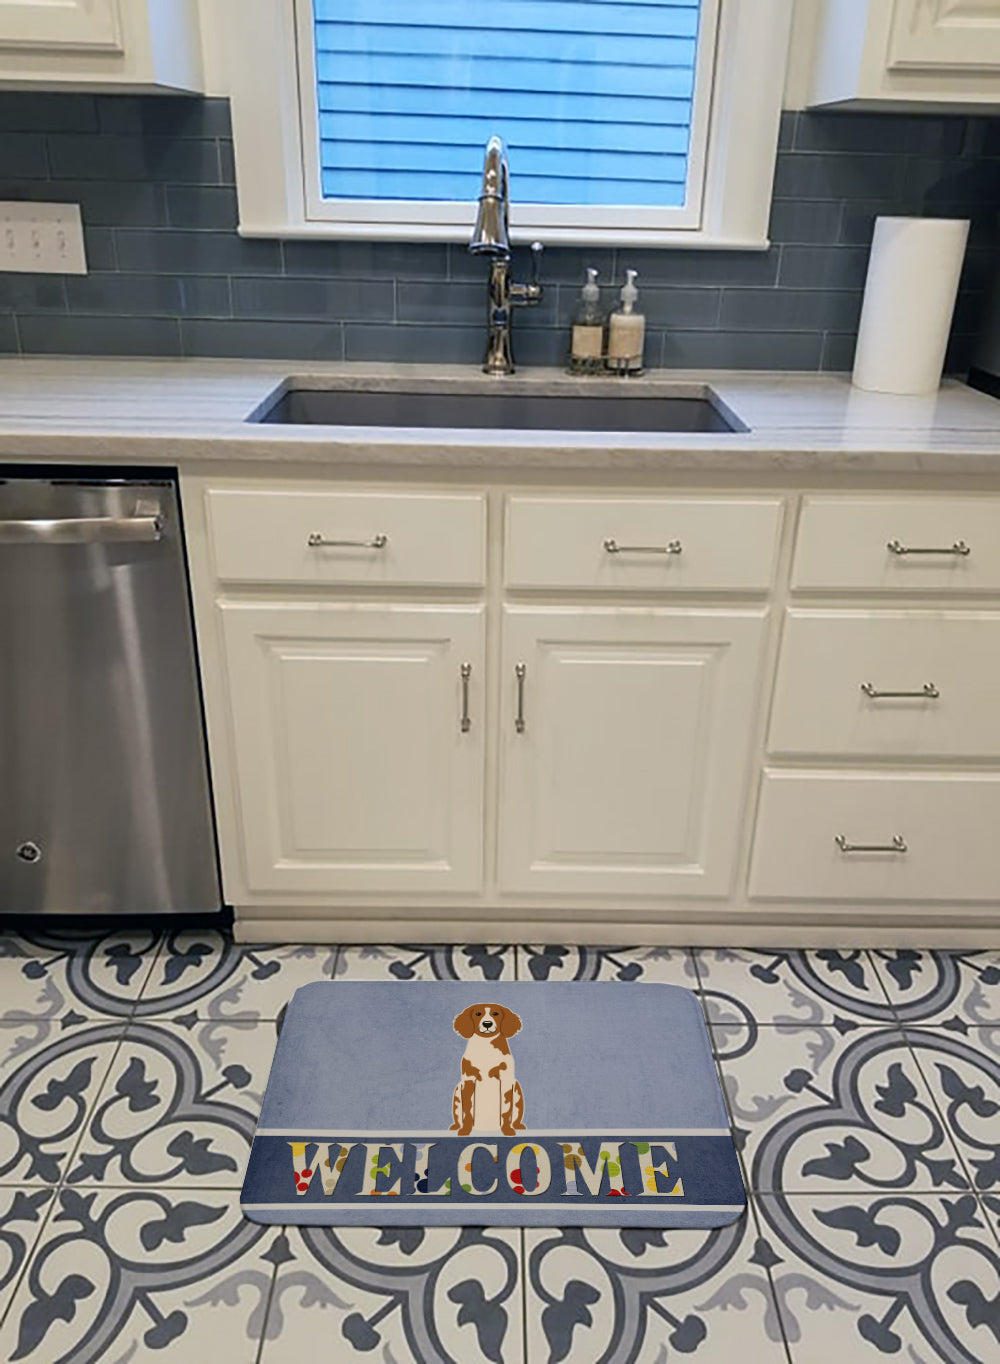 Brittany Spaniel Welcome Machine Washable Memory Foam Mat BB5653RUG - the-store.com